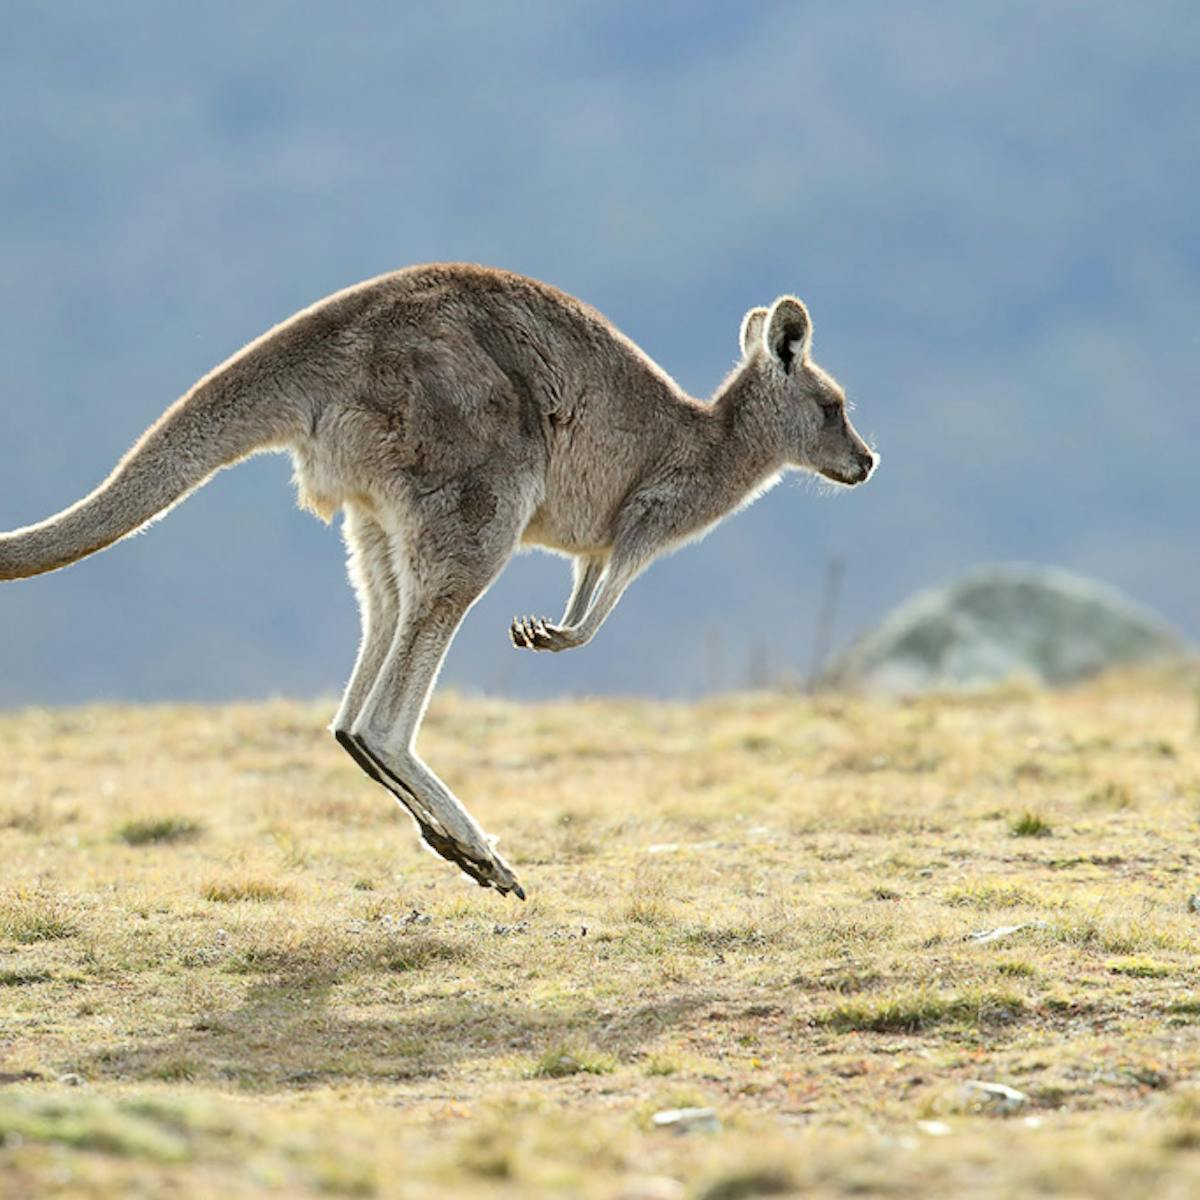 Giant kangaroos were more likely to walk than hop